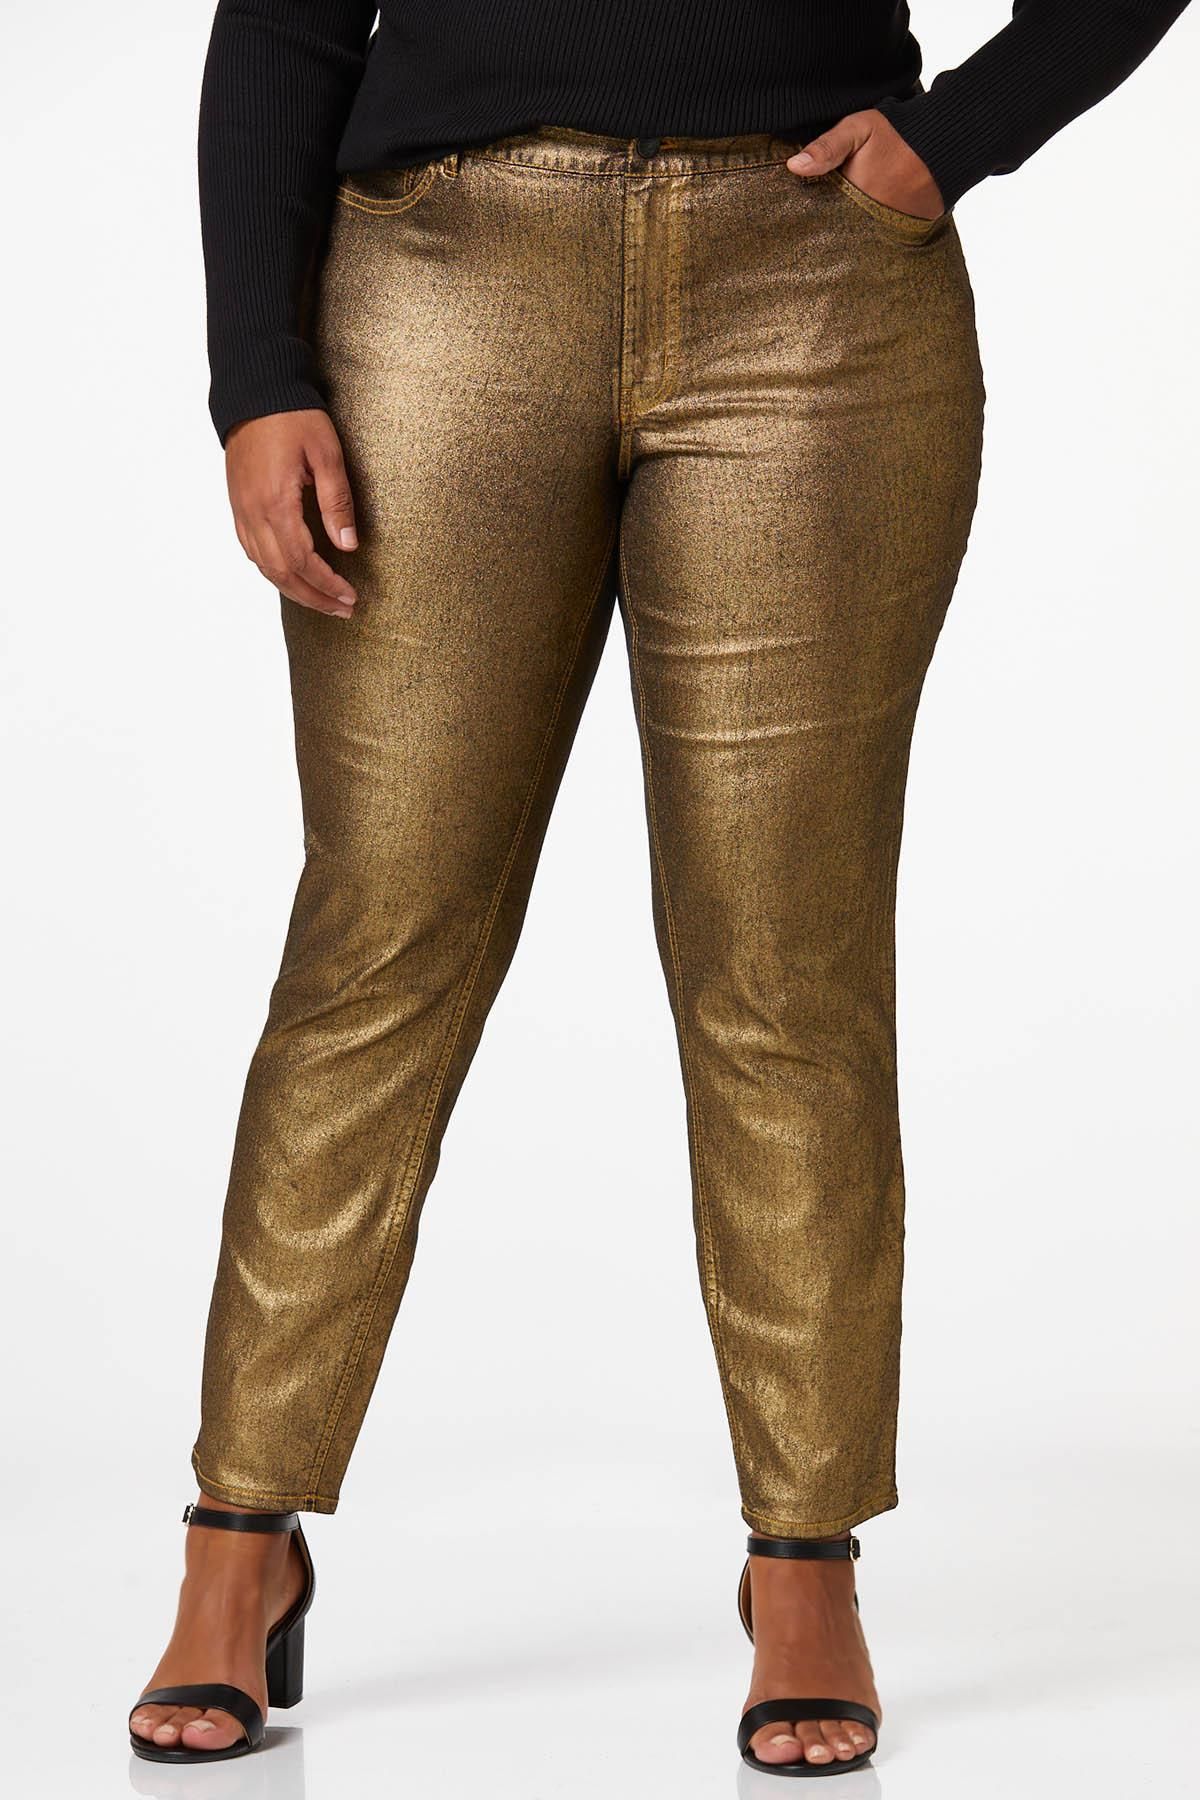 Plus Petite Gold Coated Jeans | Cato Fashions